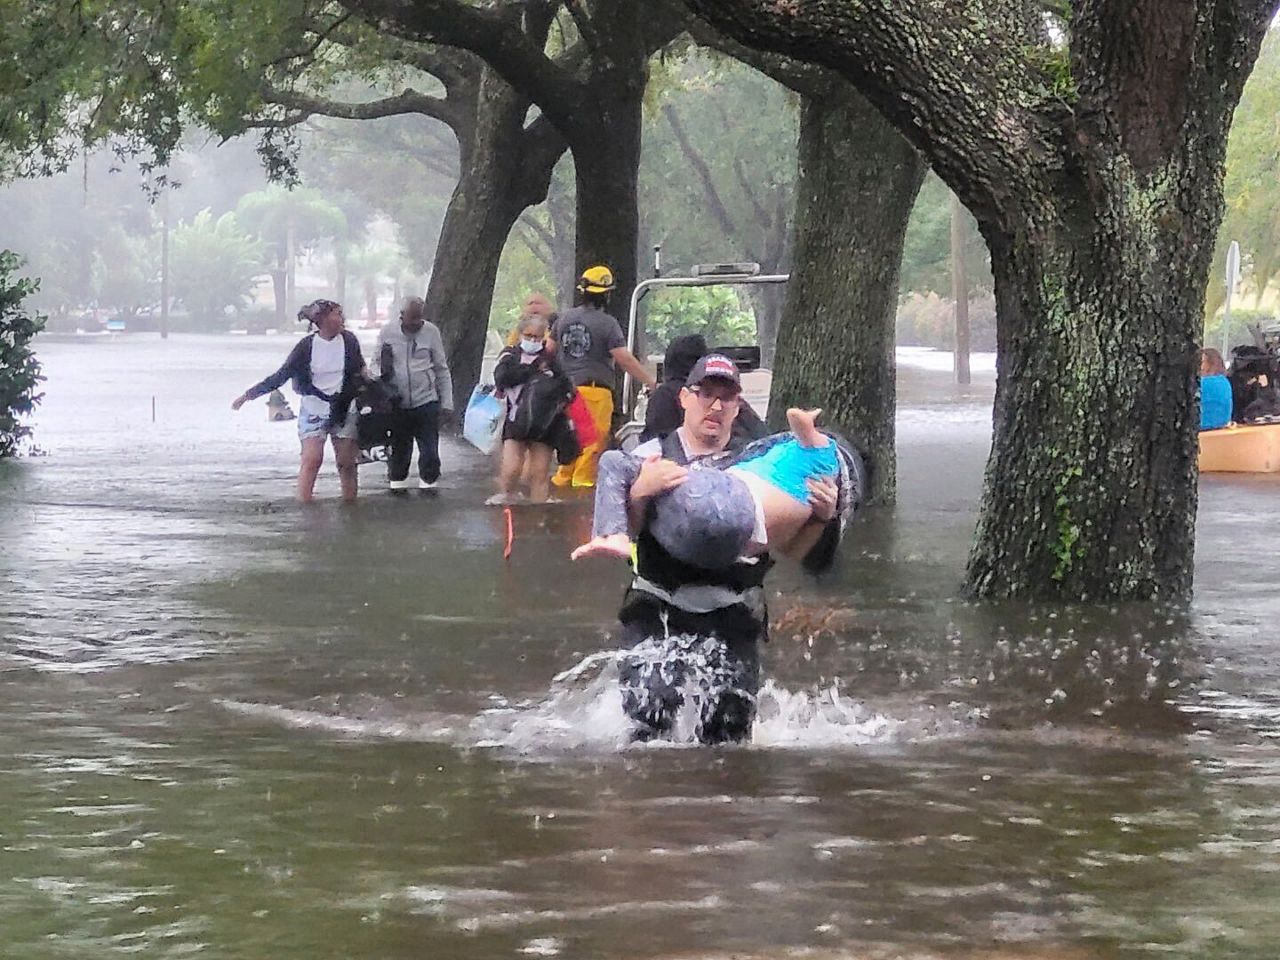 Fire and EMS services provide high water rescues as flood waters rise. (AP)